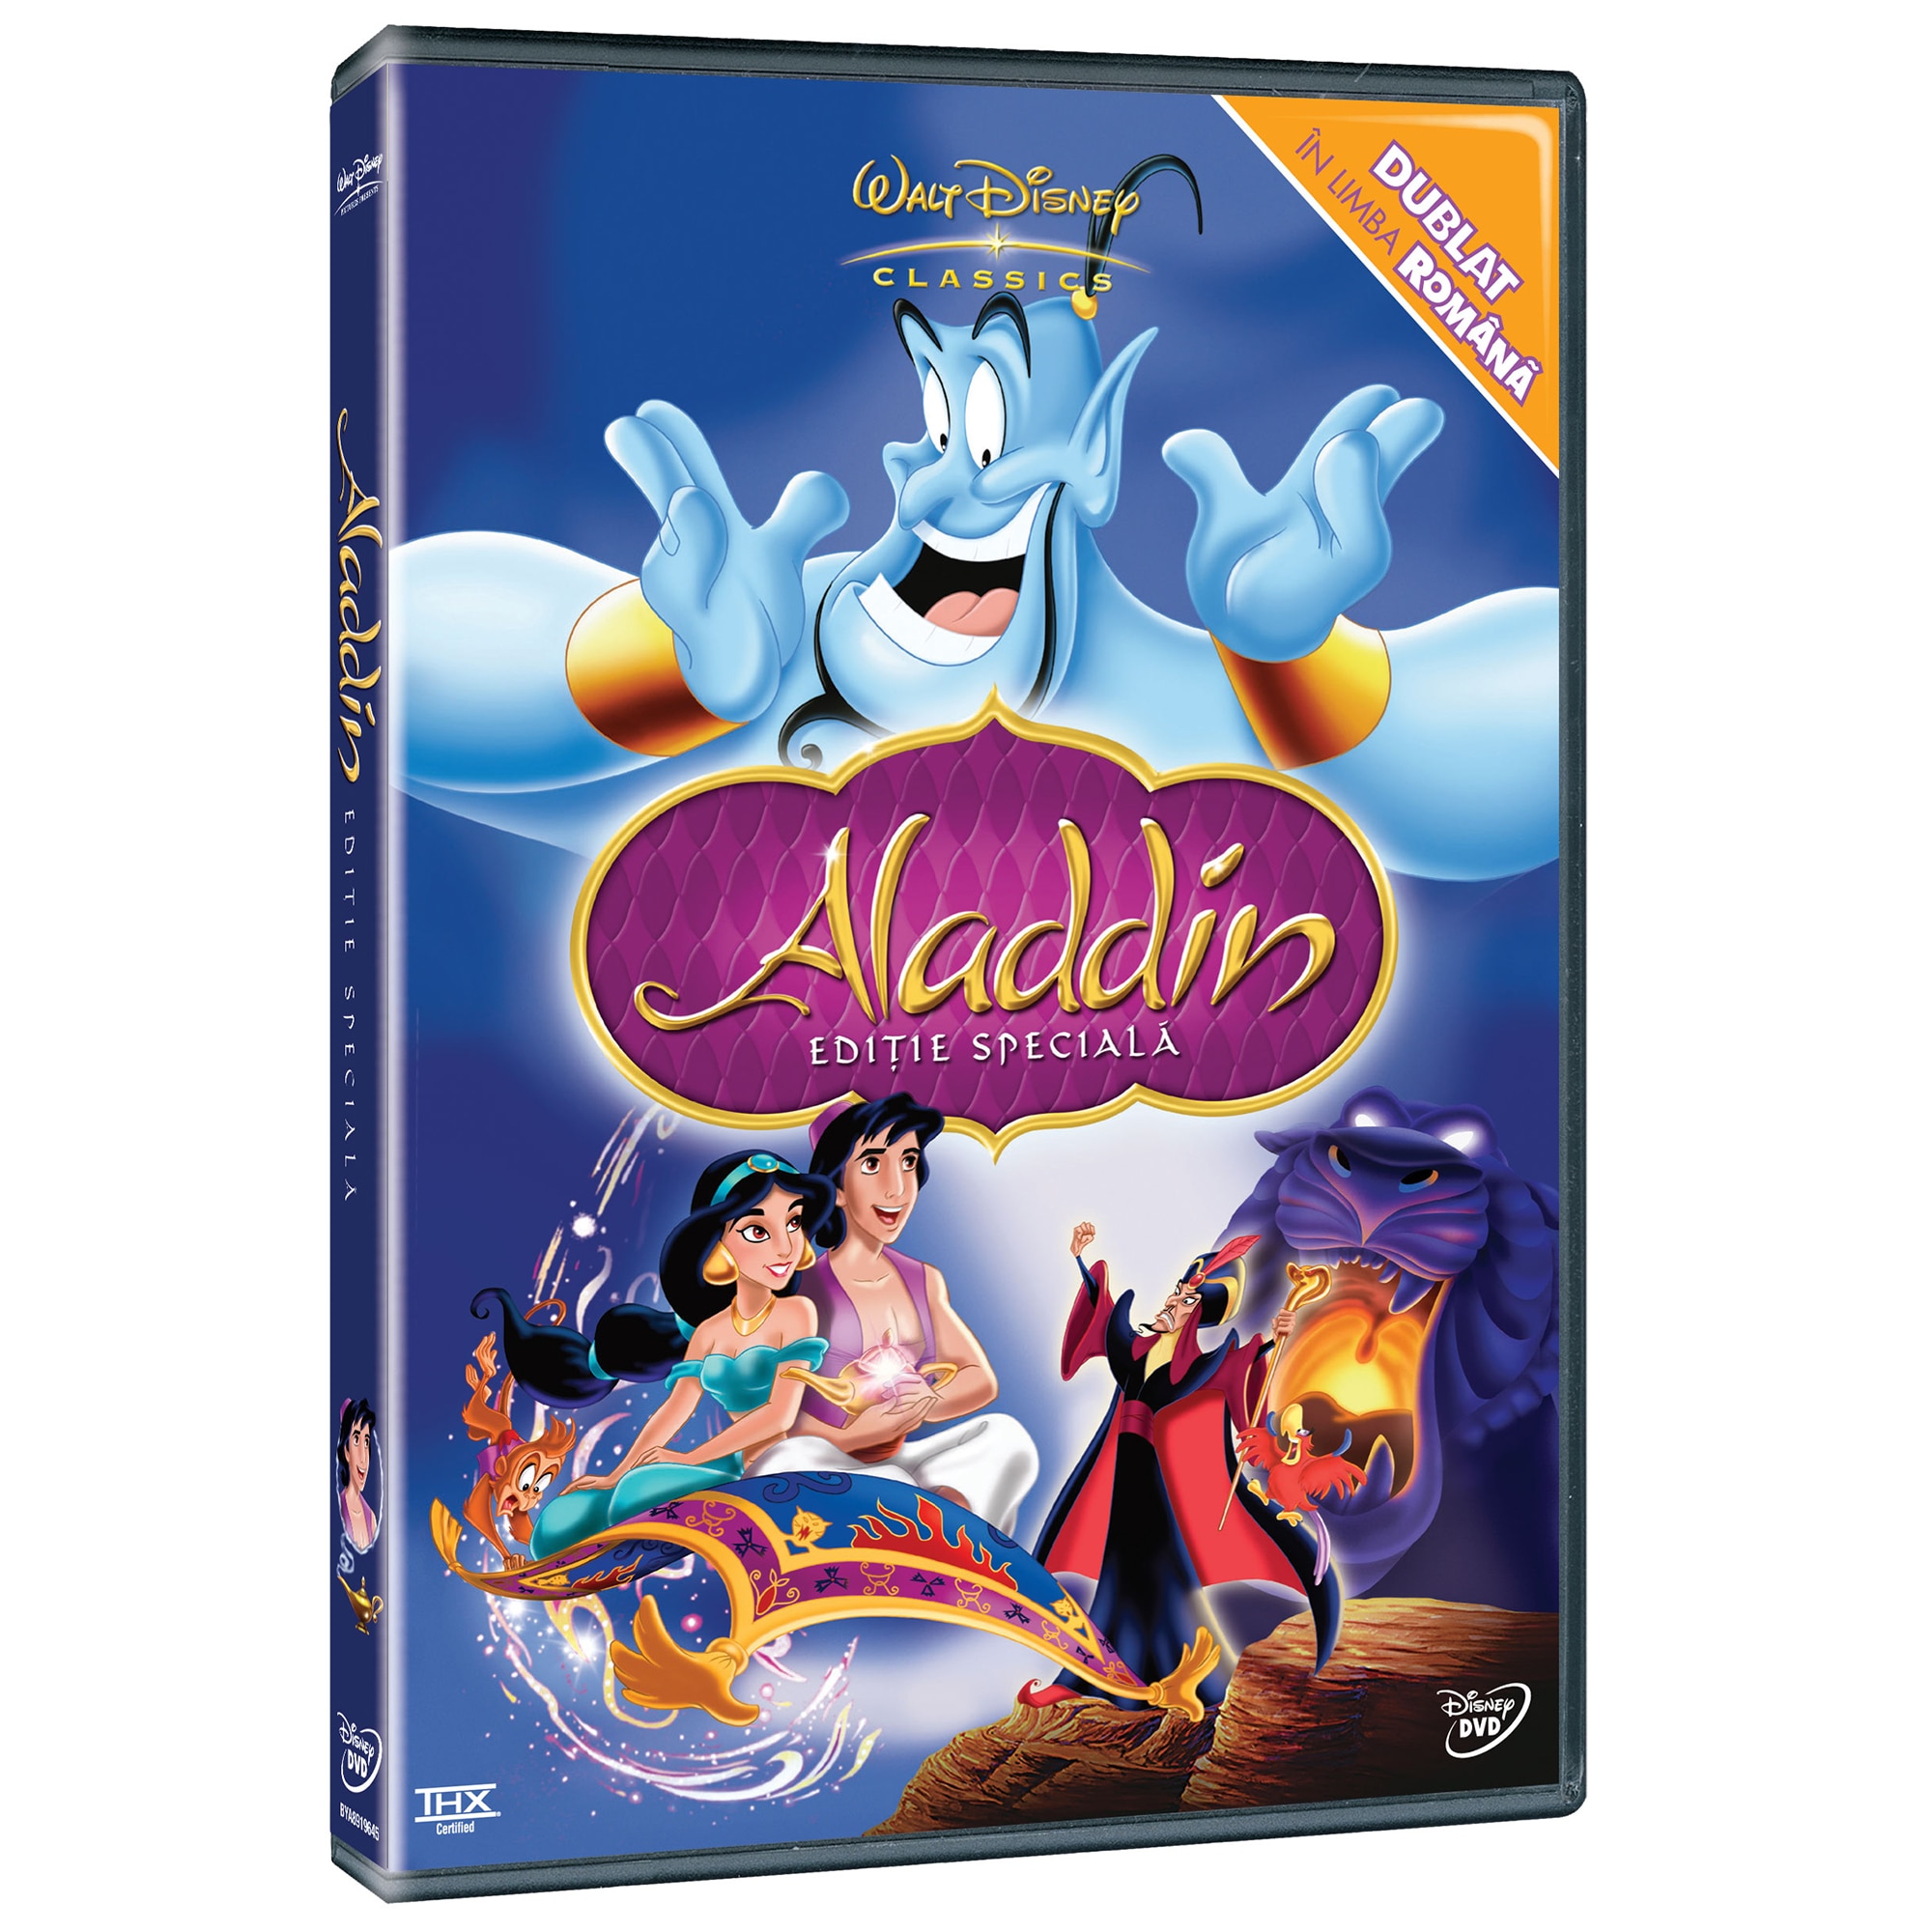 Mittens Punctuation Soldier ALADDIN [DVD] [1992] - eMAG.ro